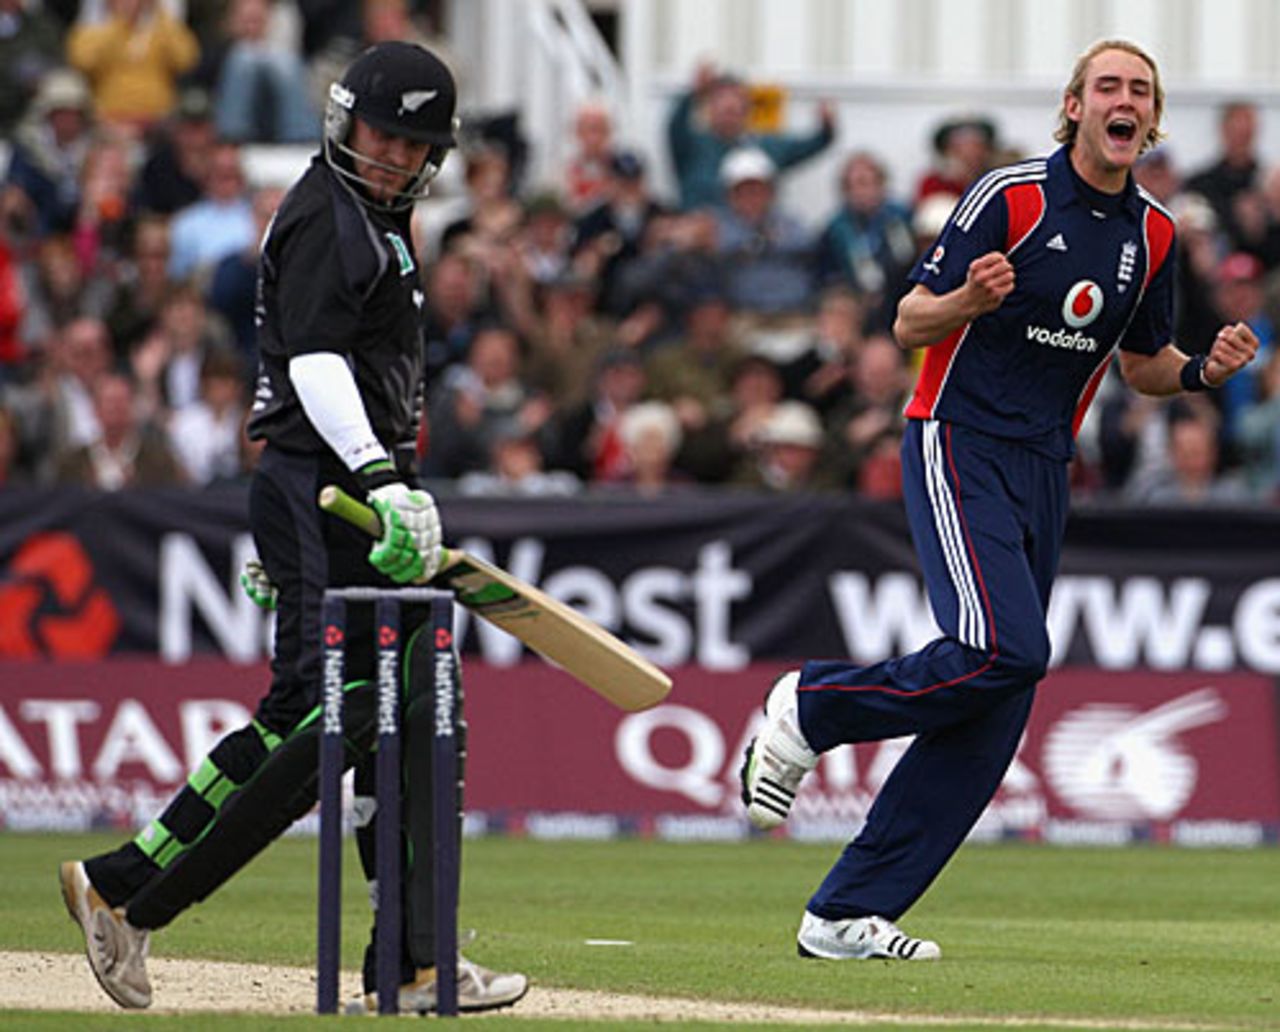 The big one: Stuart Broad celebrates the wicket of Brendon McCullum, England v New Zealand, 1st ODI, Chester-le-Street, June 15, 2008